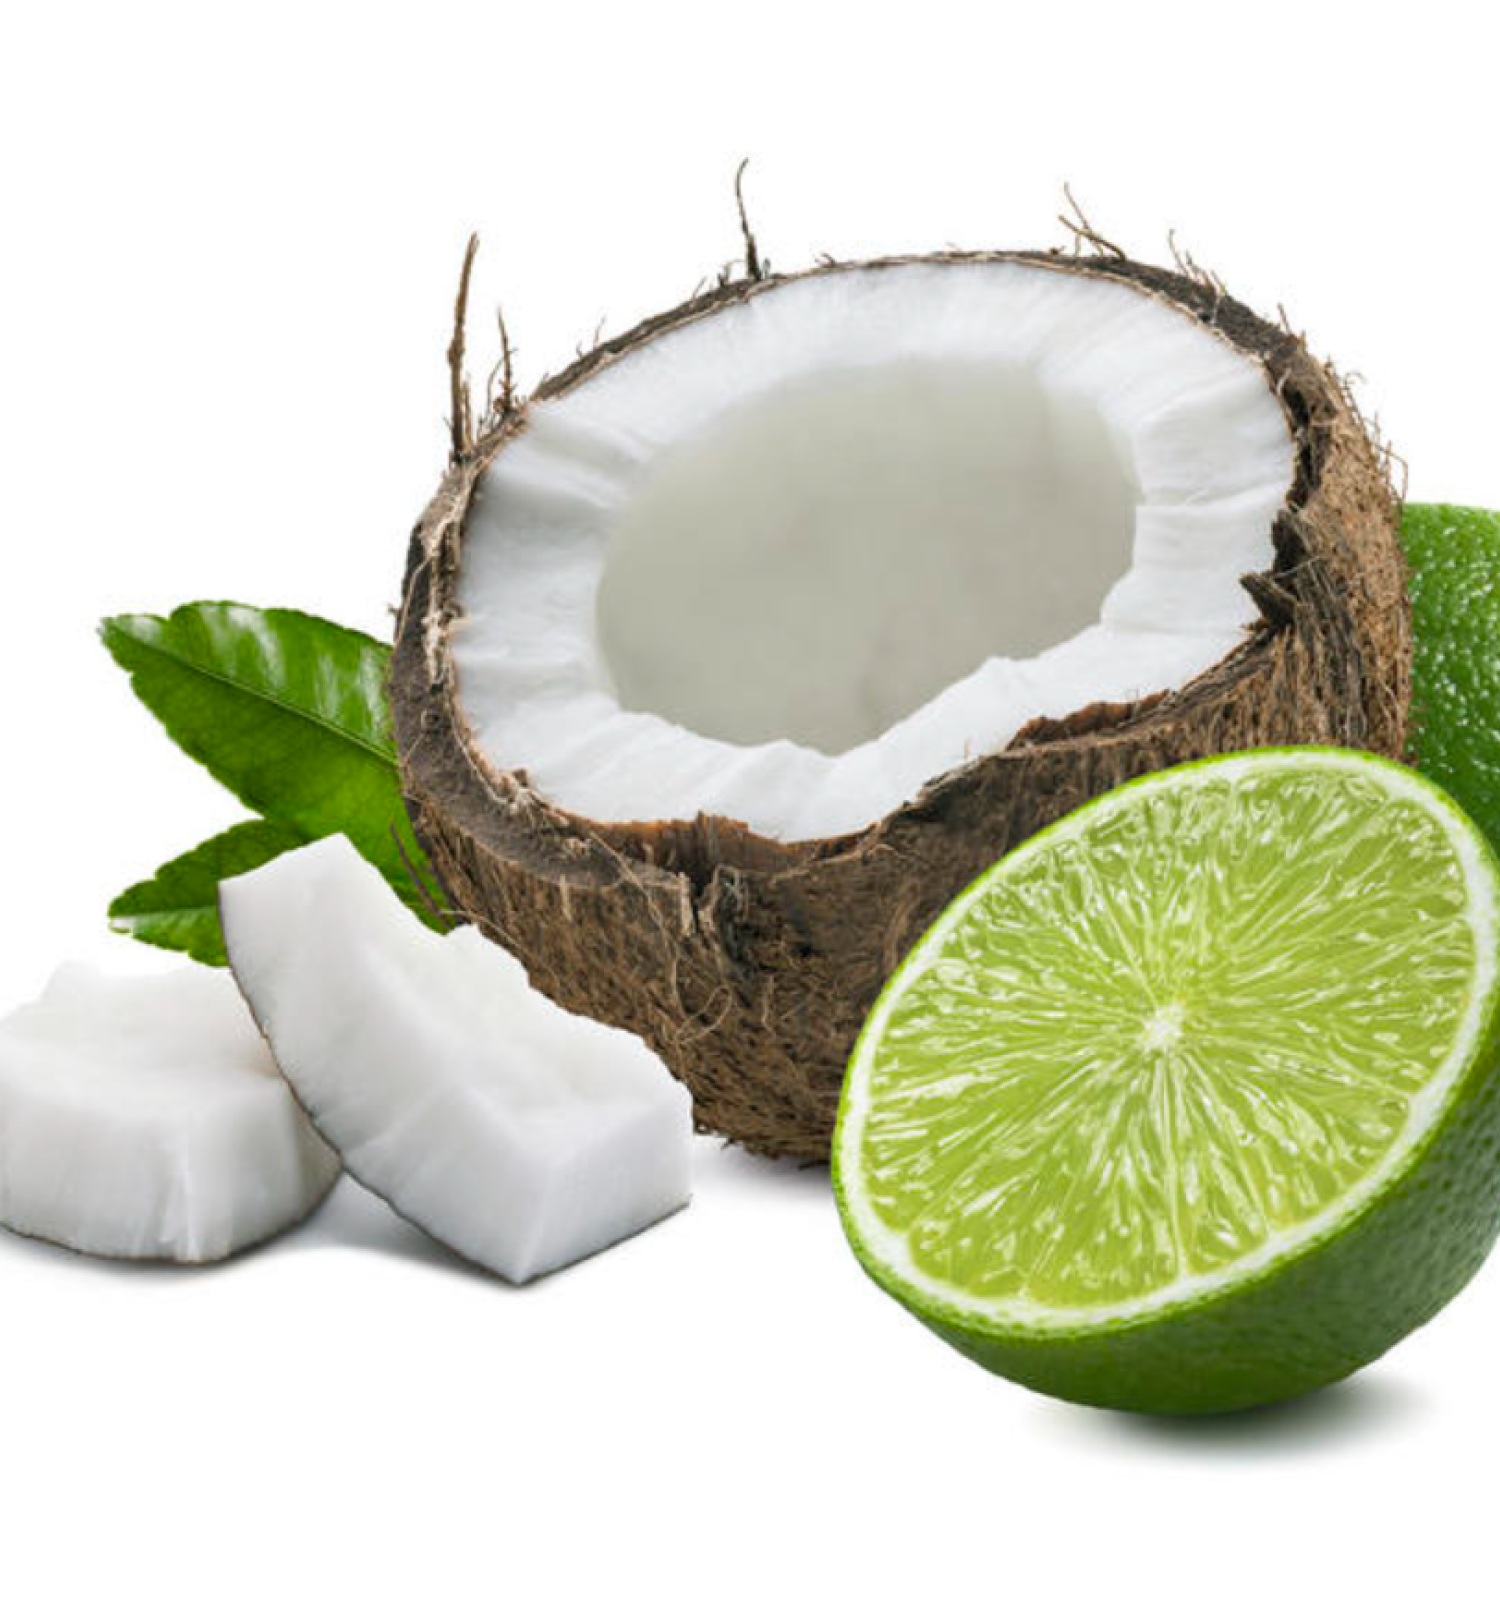 Image of a halved coconut, coconut pieces, a halved lime, and lime leaves arranged together.